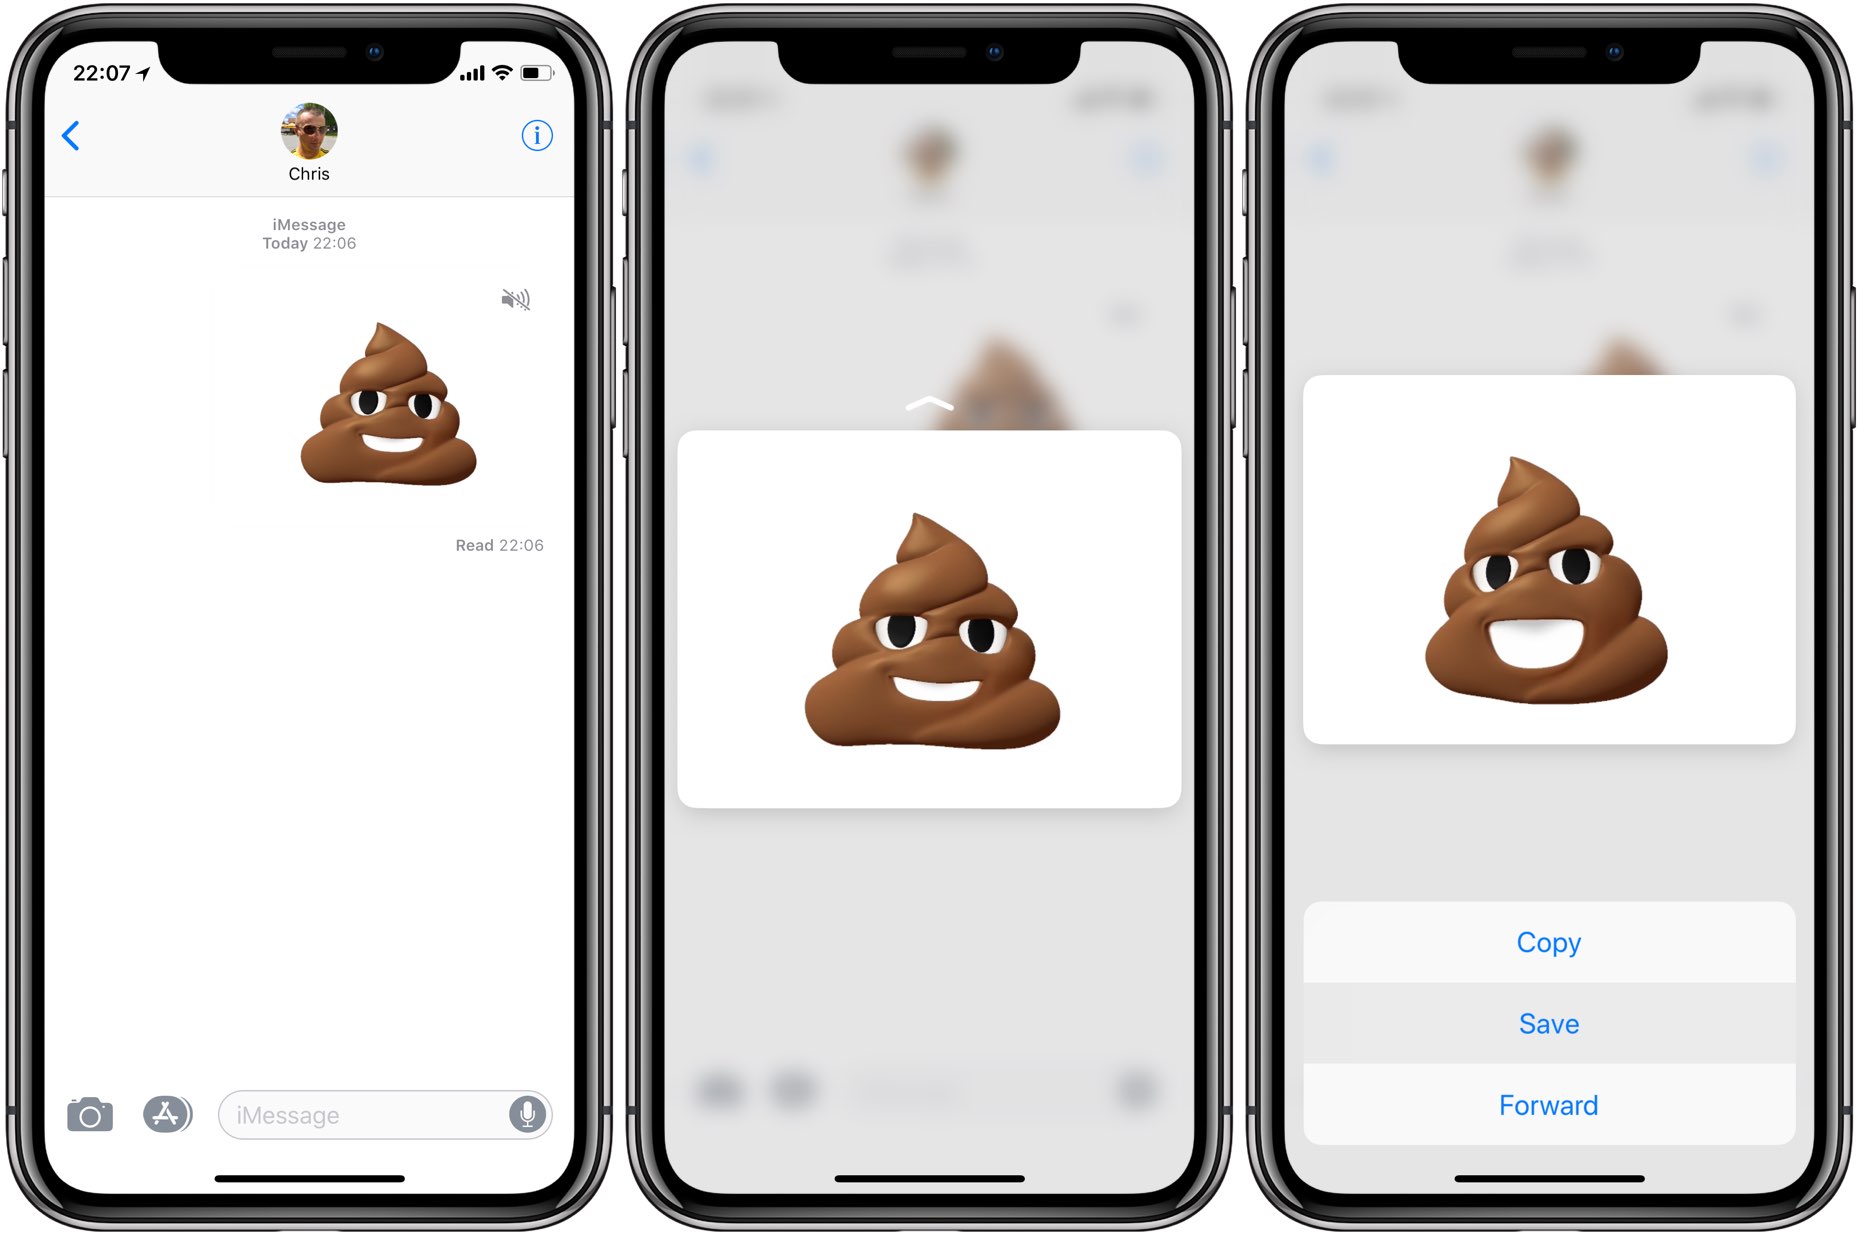 How to create, save and share videos with Animoji